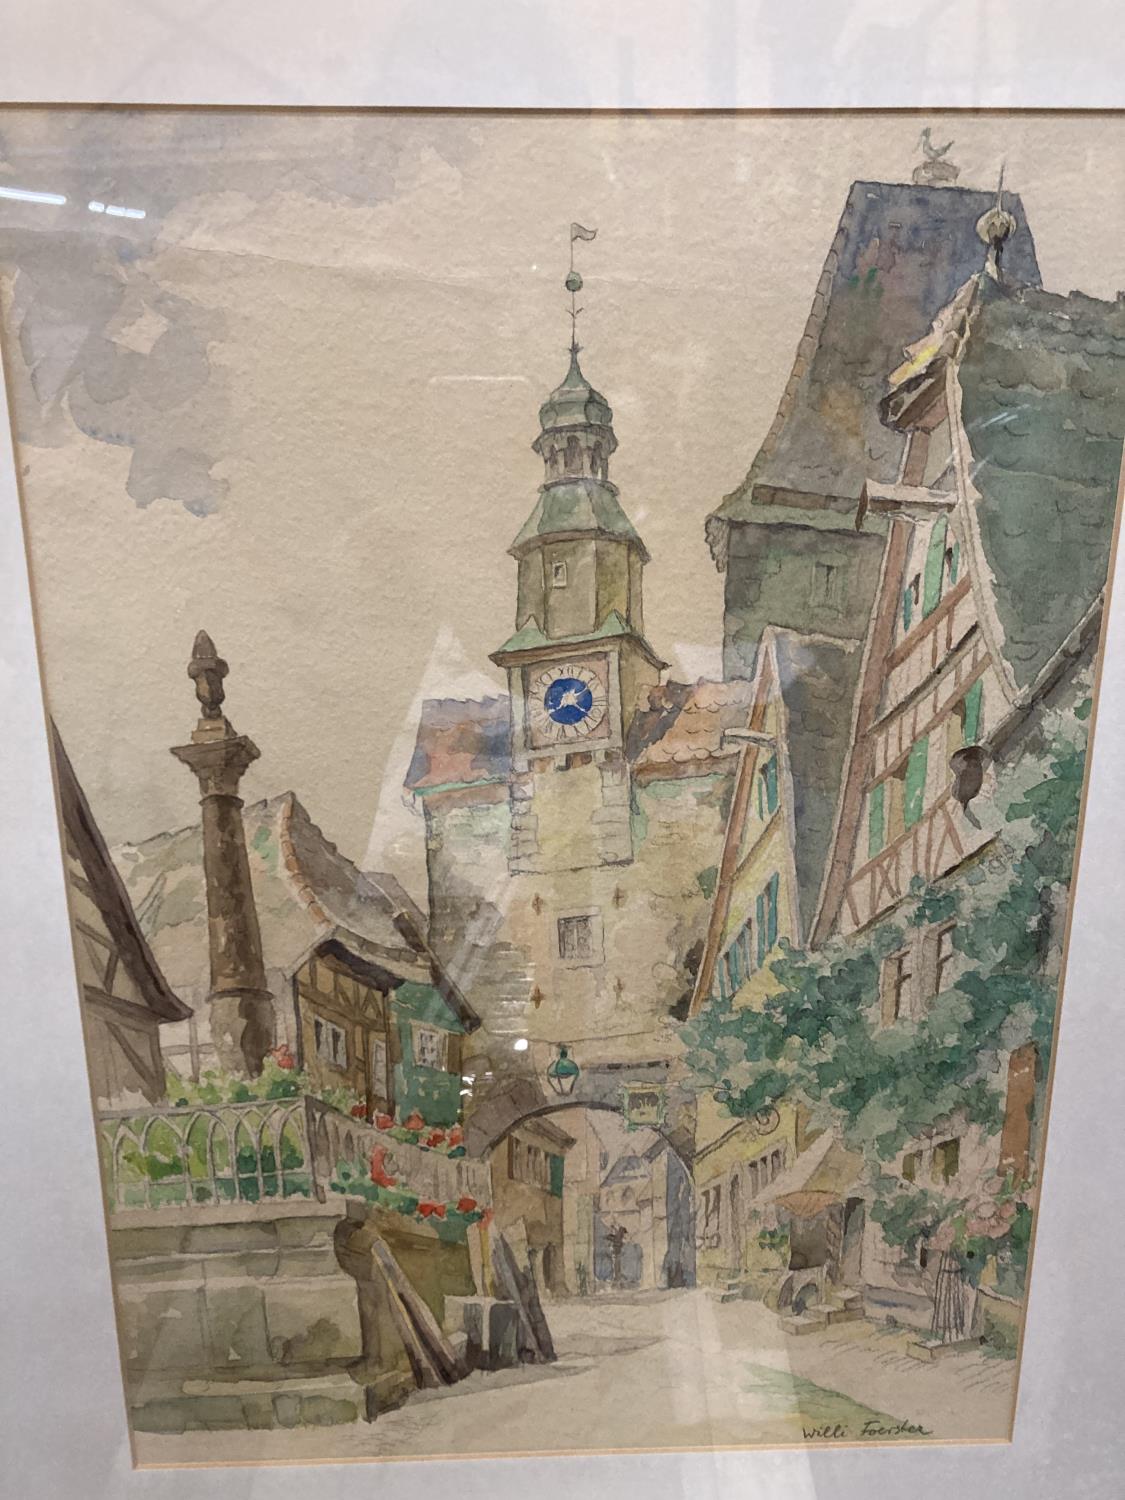 A FRAMED PRINT OF A WATERCOLOUR OF ROTHENBURG OB DER TAUBER BY WILLI FOERSTER - Image 3 of 3